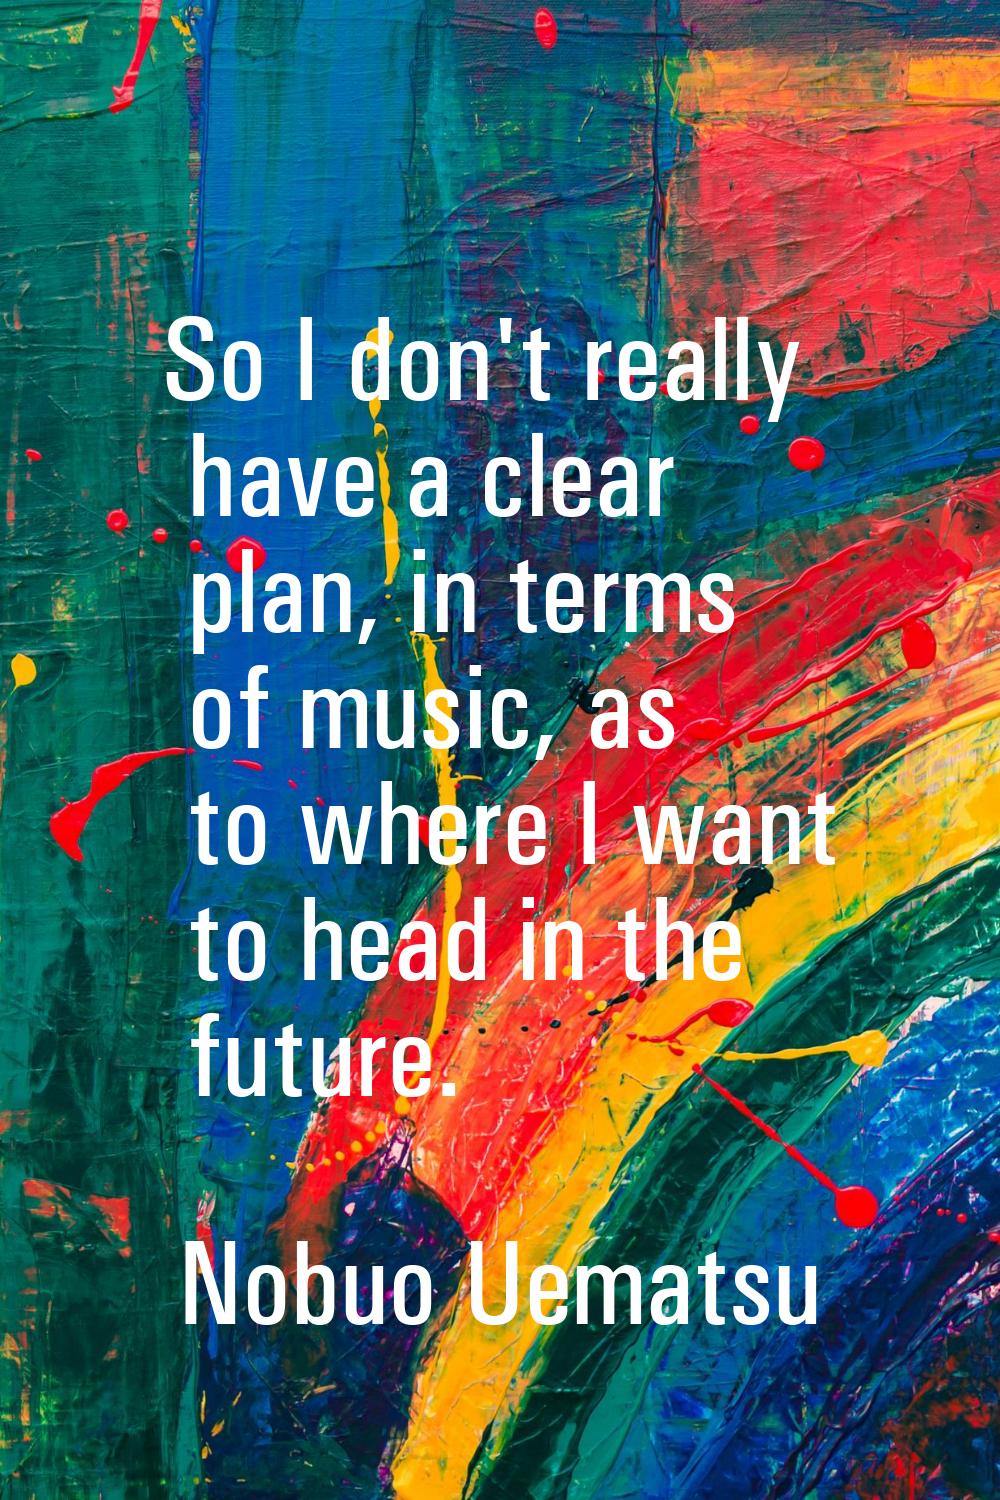 So I don't really have a clear plan, in terms of music, as to where I want to head in the future.